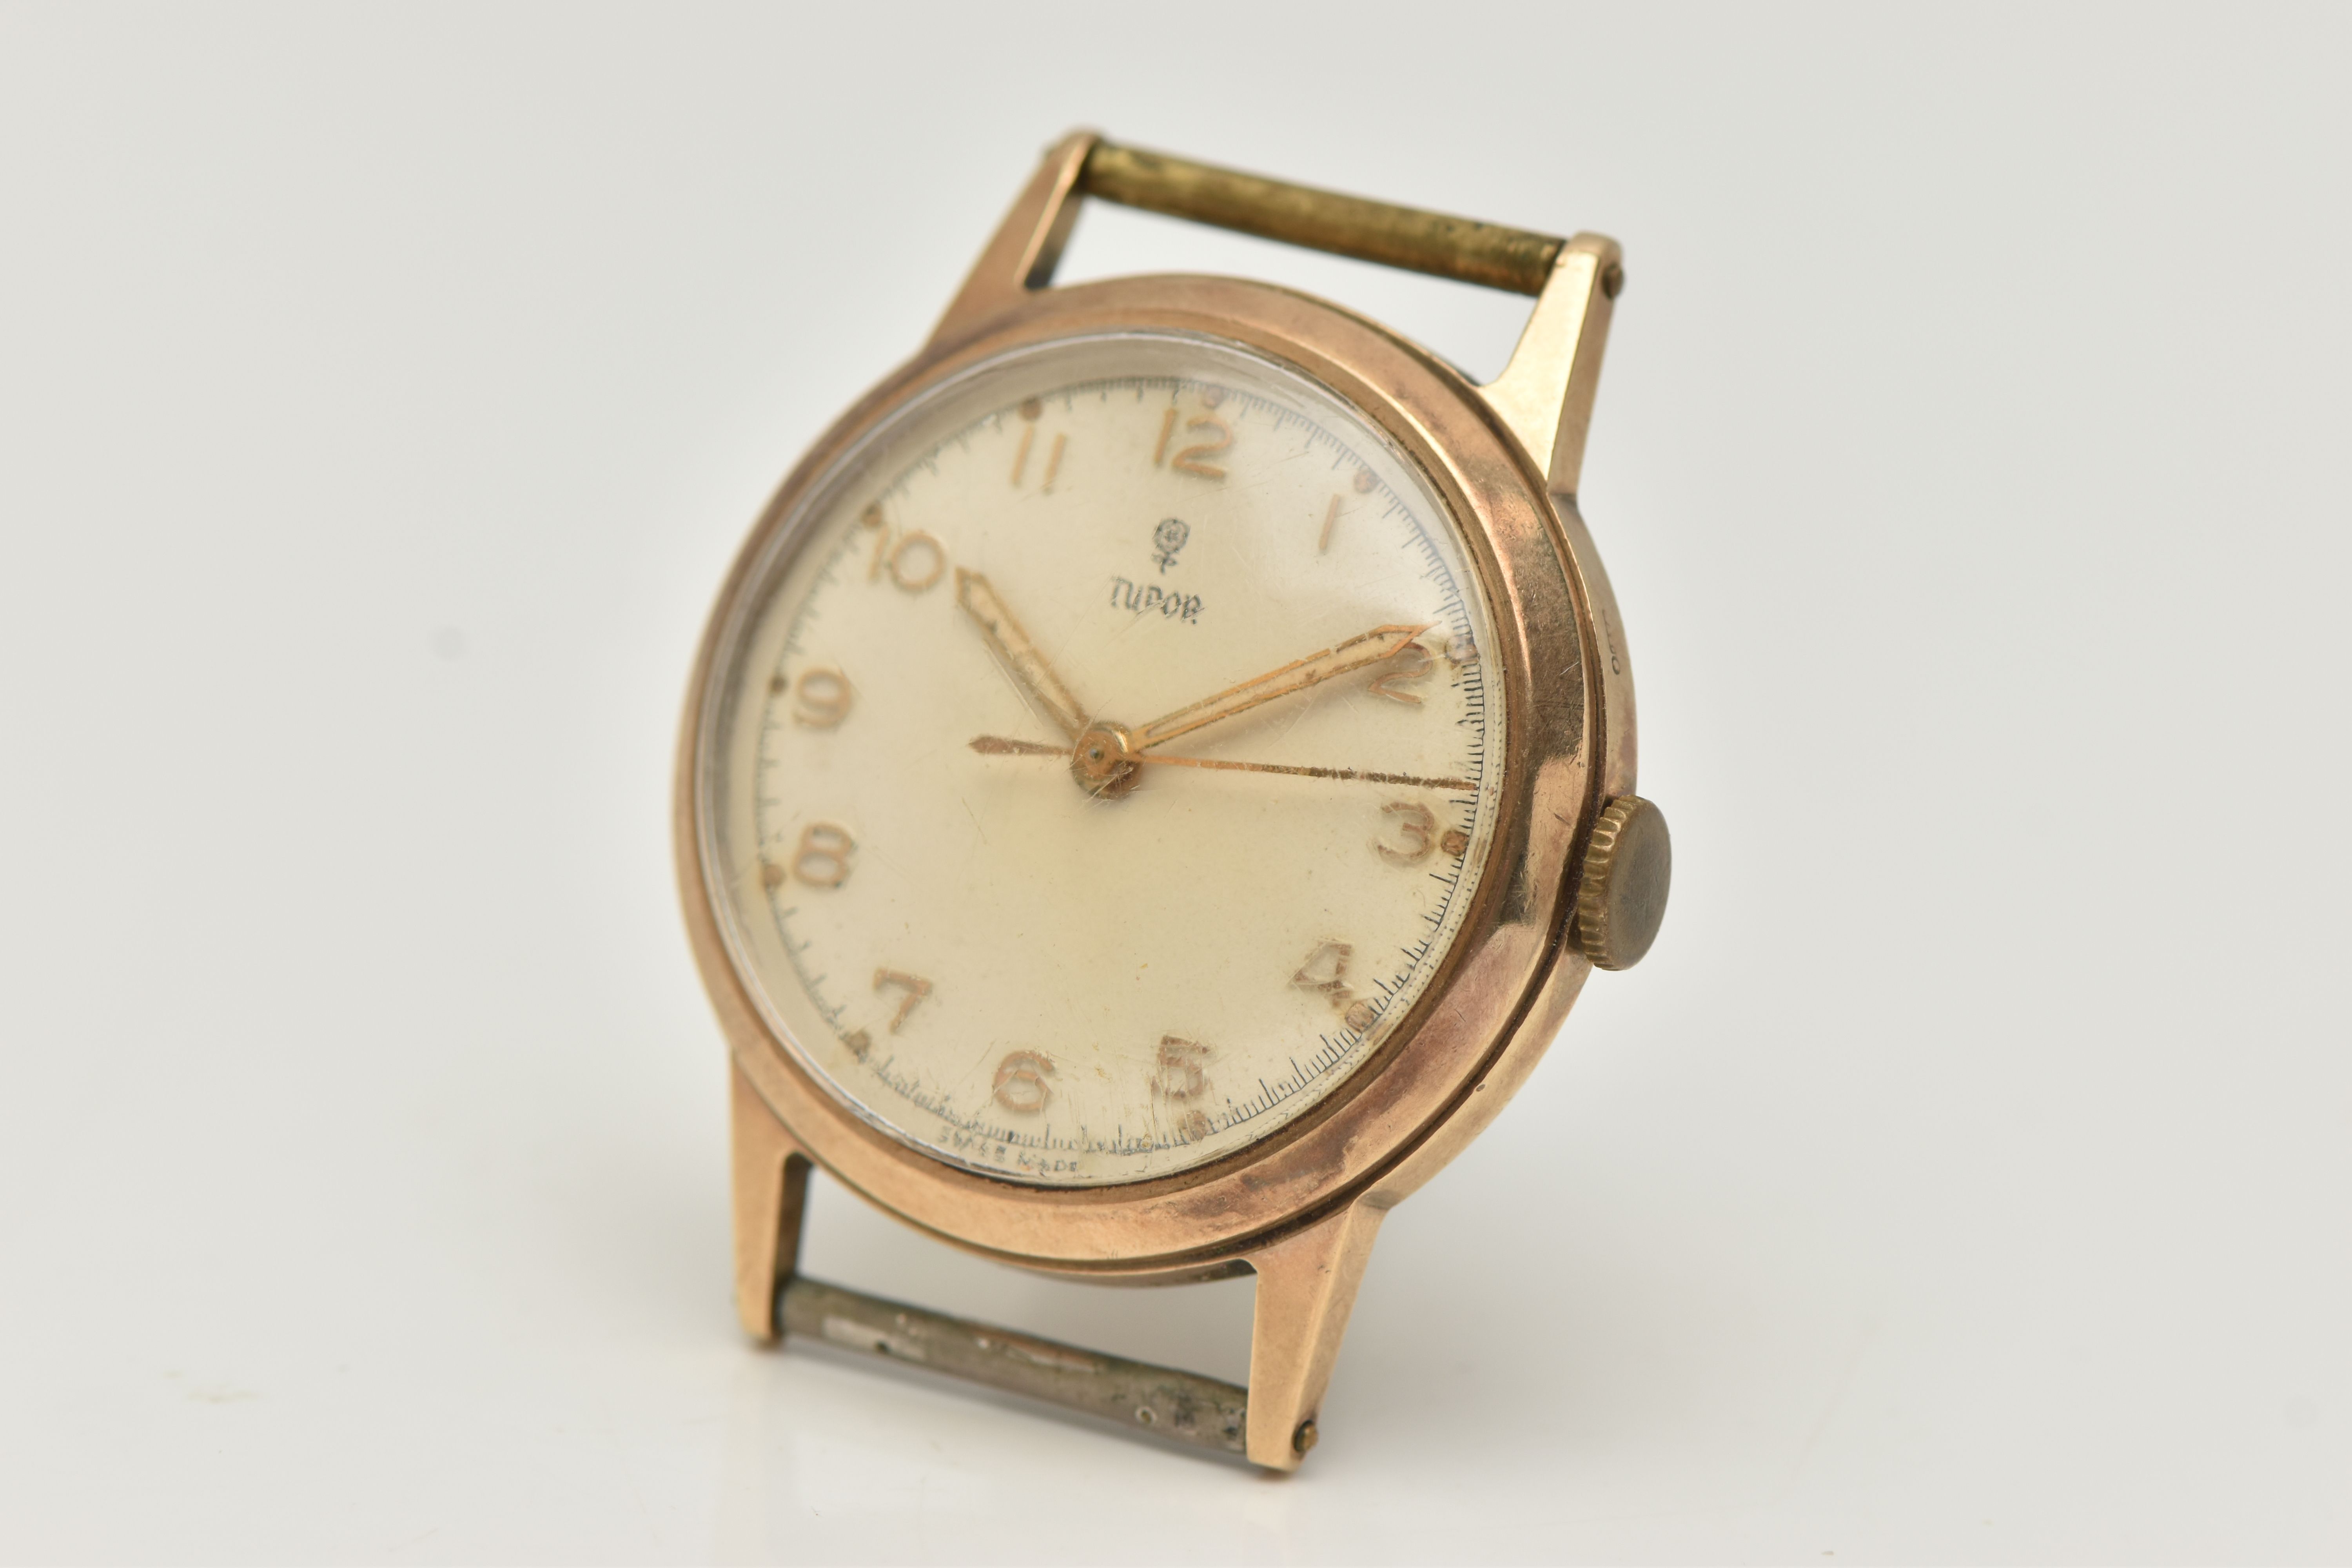 A GENTS 9CT GOLD 'TUDOR' WATCH, manual wind, round cream dial signed 'Tudor', Arabic numerals, - Image 3 of 5